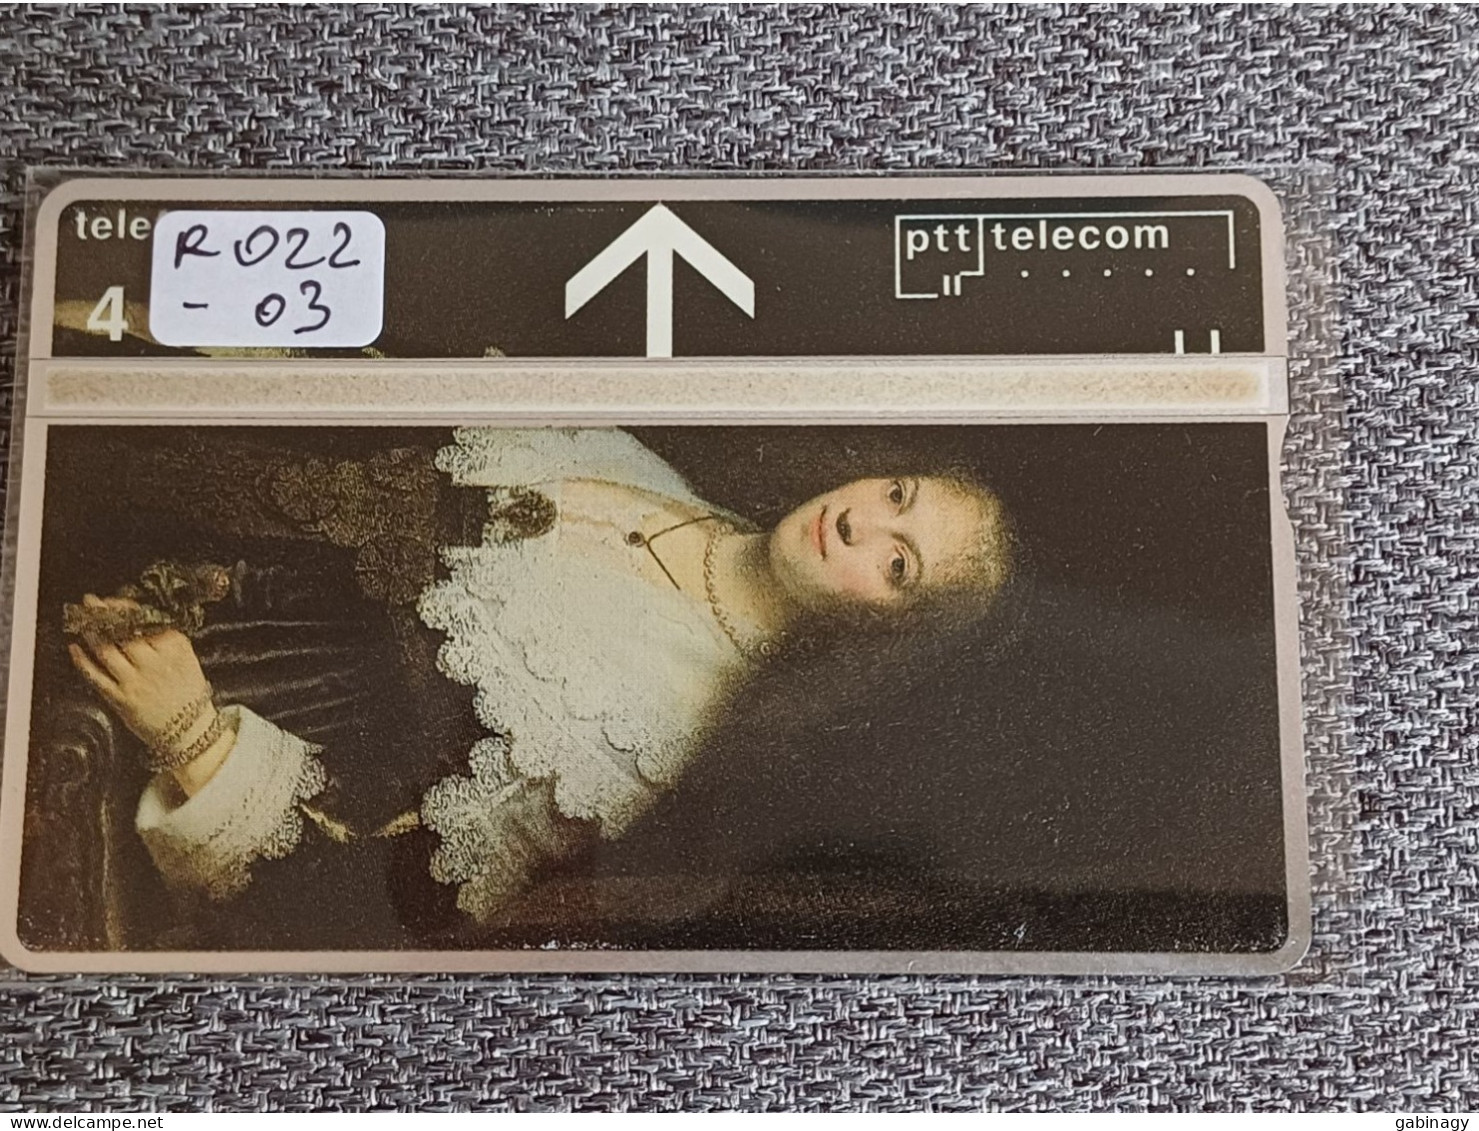 NETHERLANDS - R022-03 - REMBRANDT - PAINTING - 5.000 EX. - Private